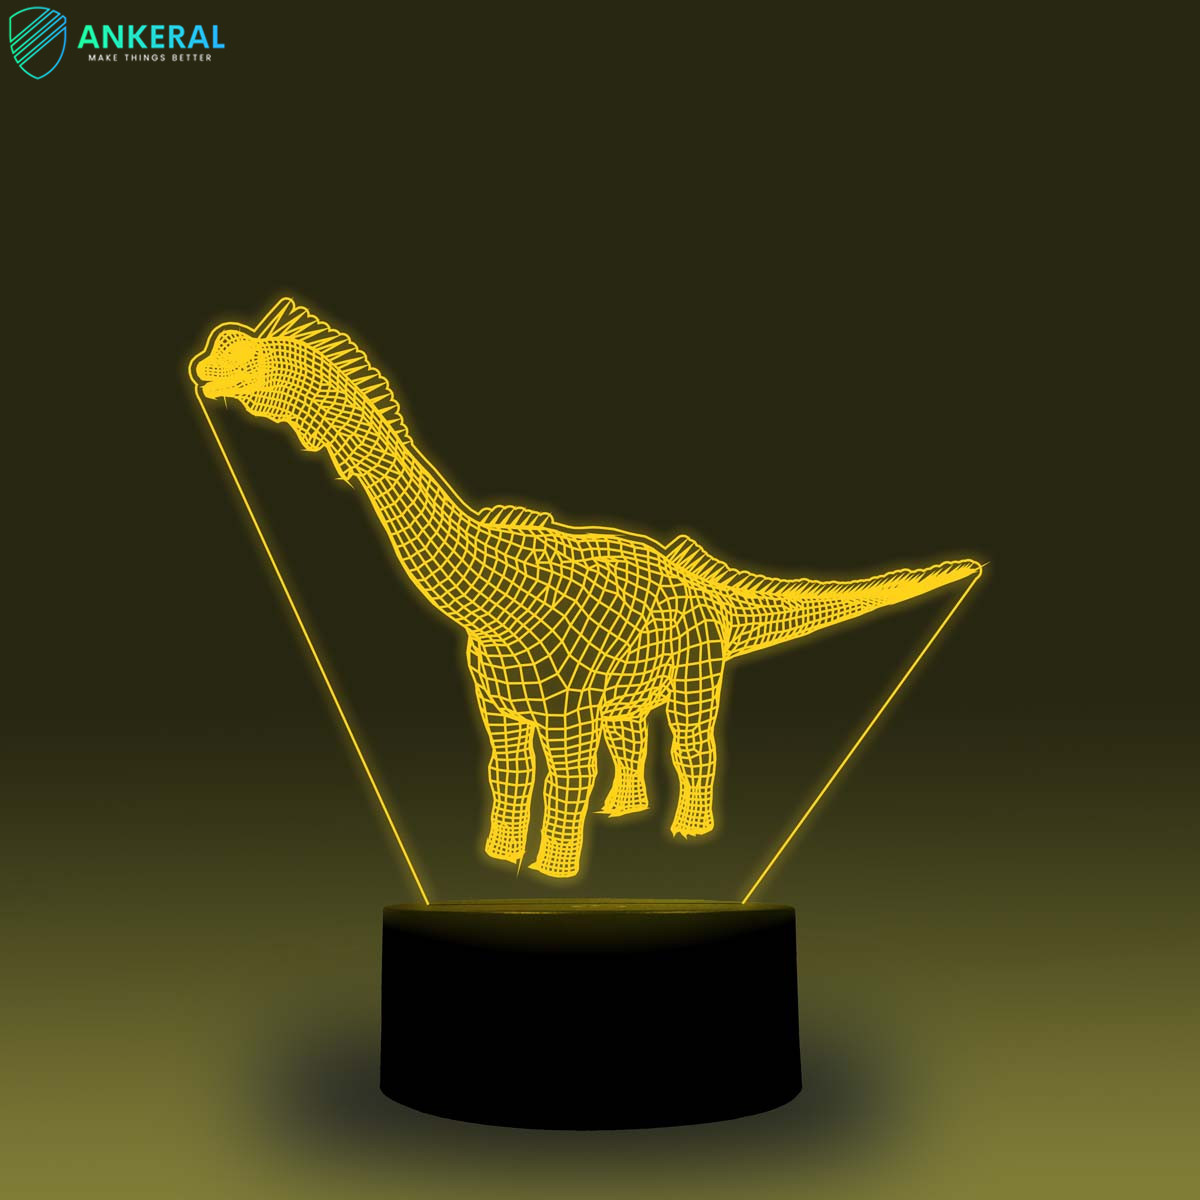 Wholesale Buy Dinosaur 3D Touch Lamp Smart APP Control Best Christmas Gifts from china suppliers